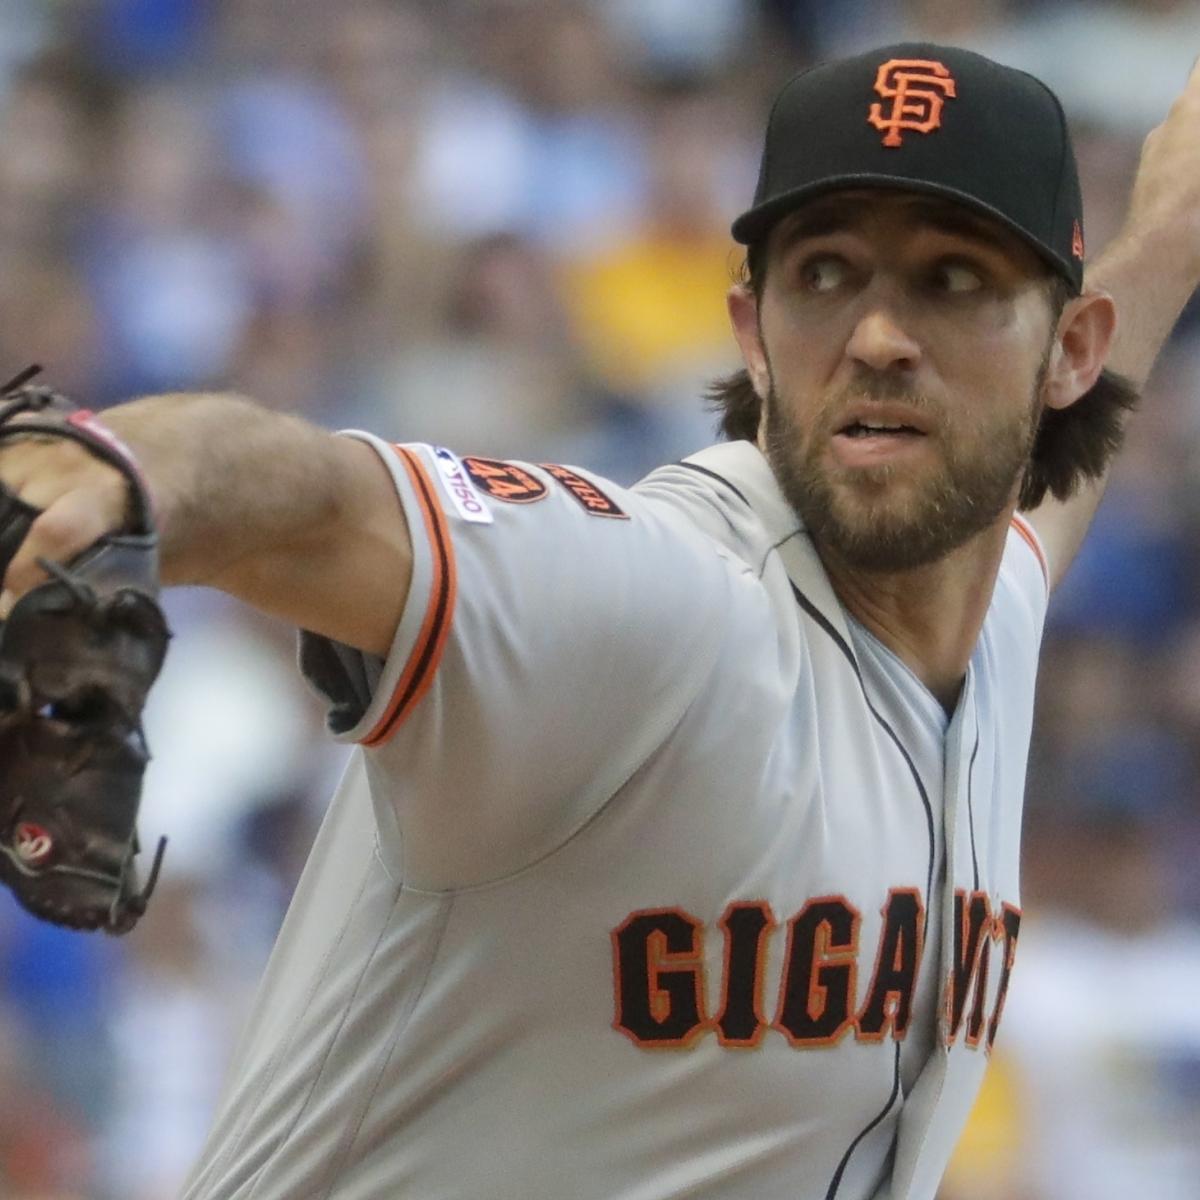 Giants report: San Francisco exploring trades with Madison